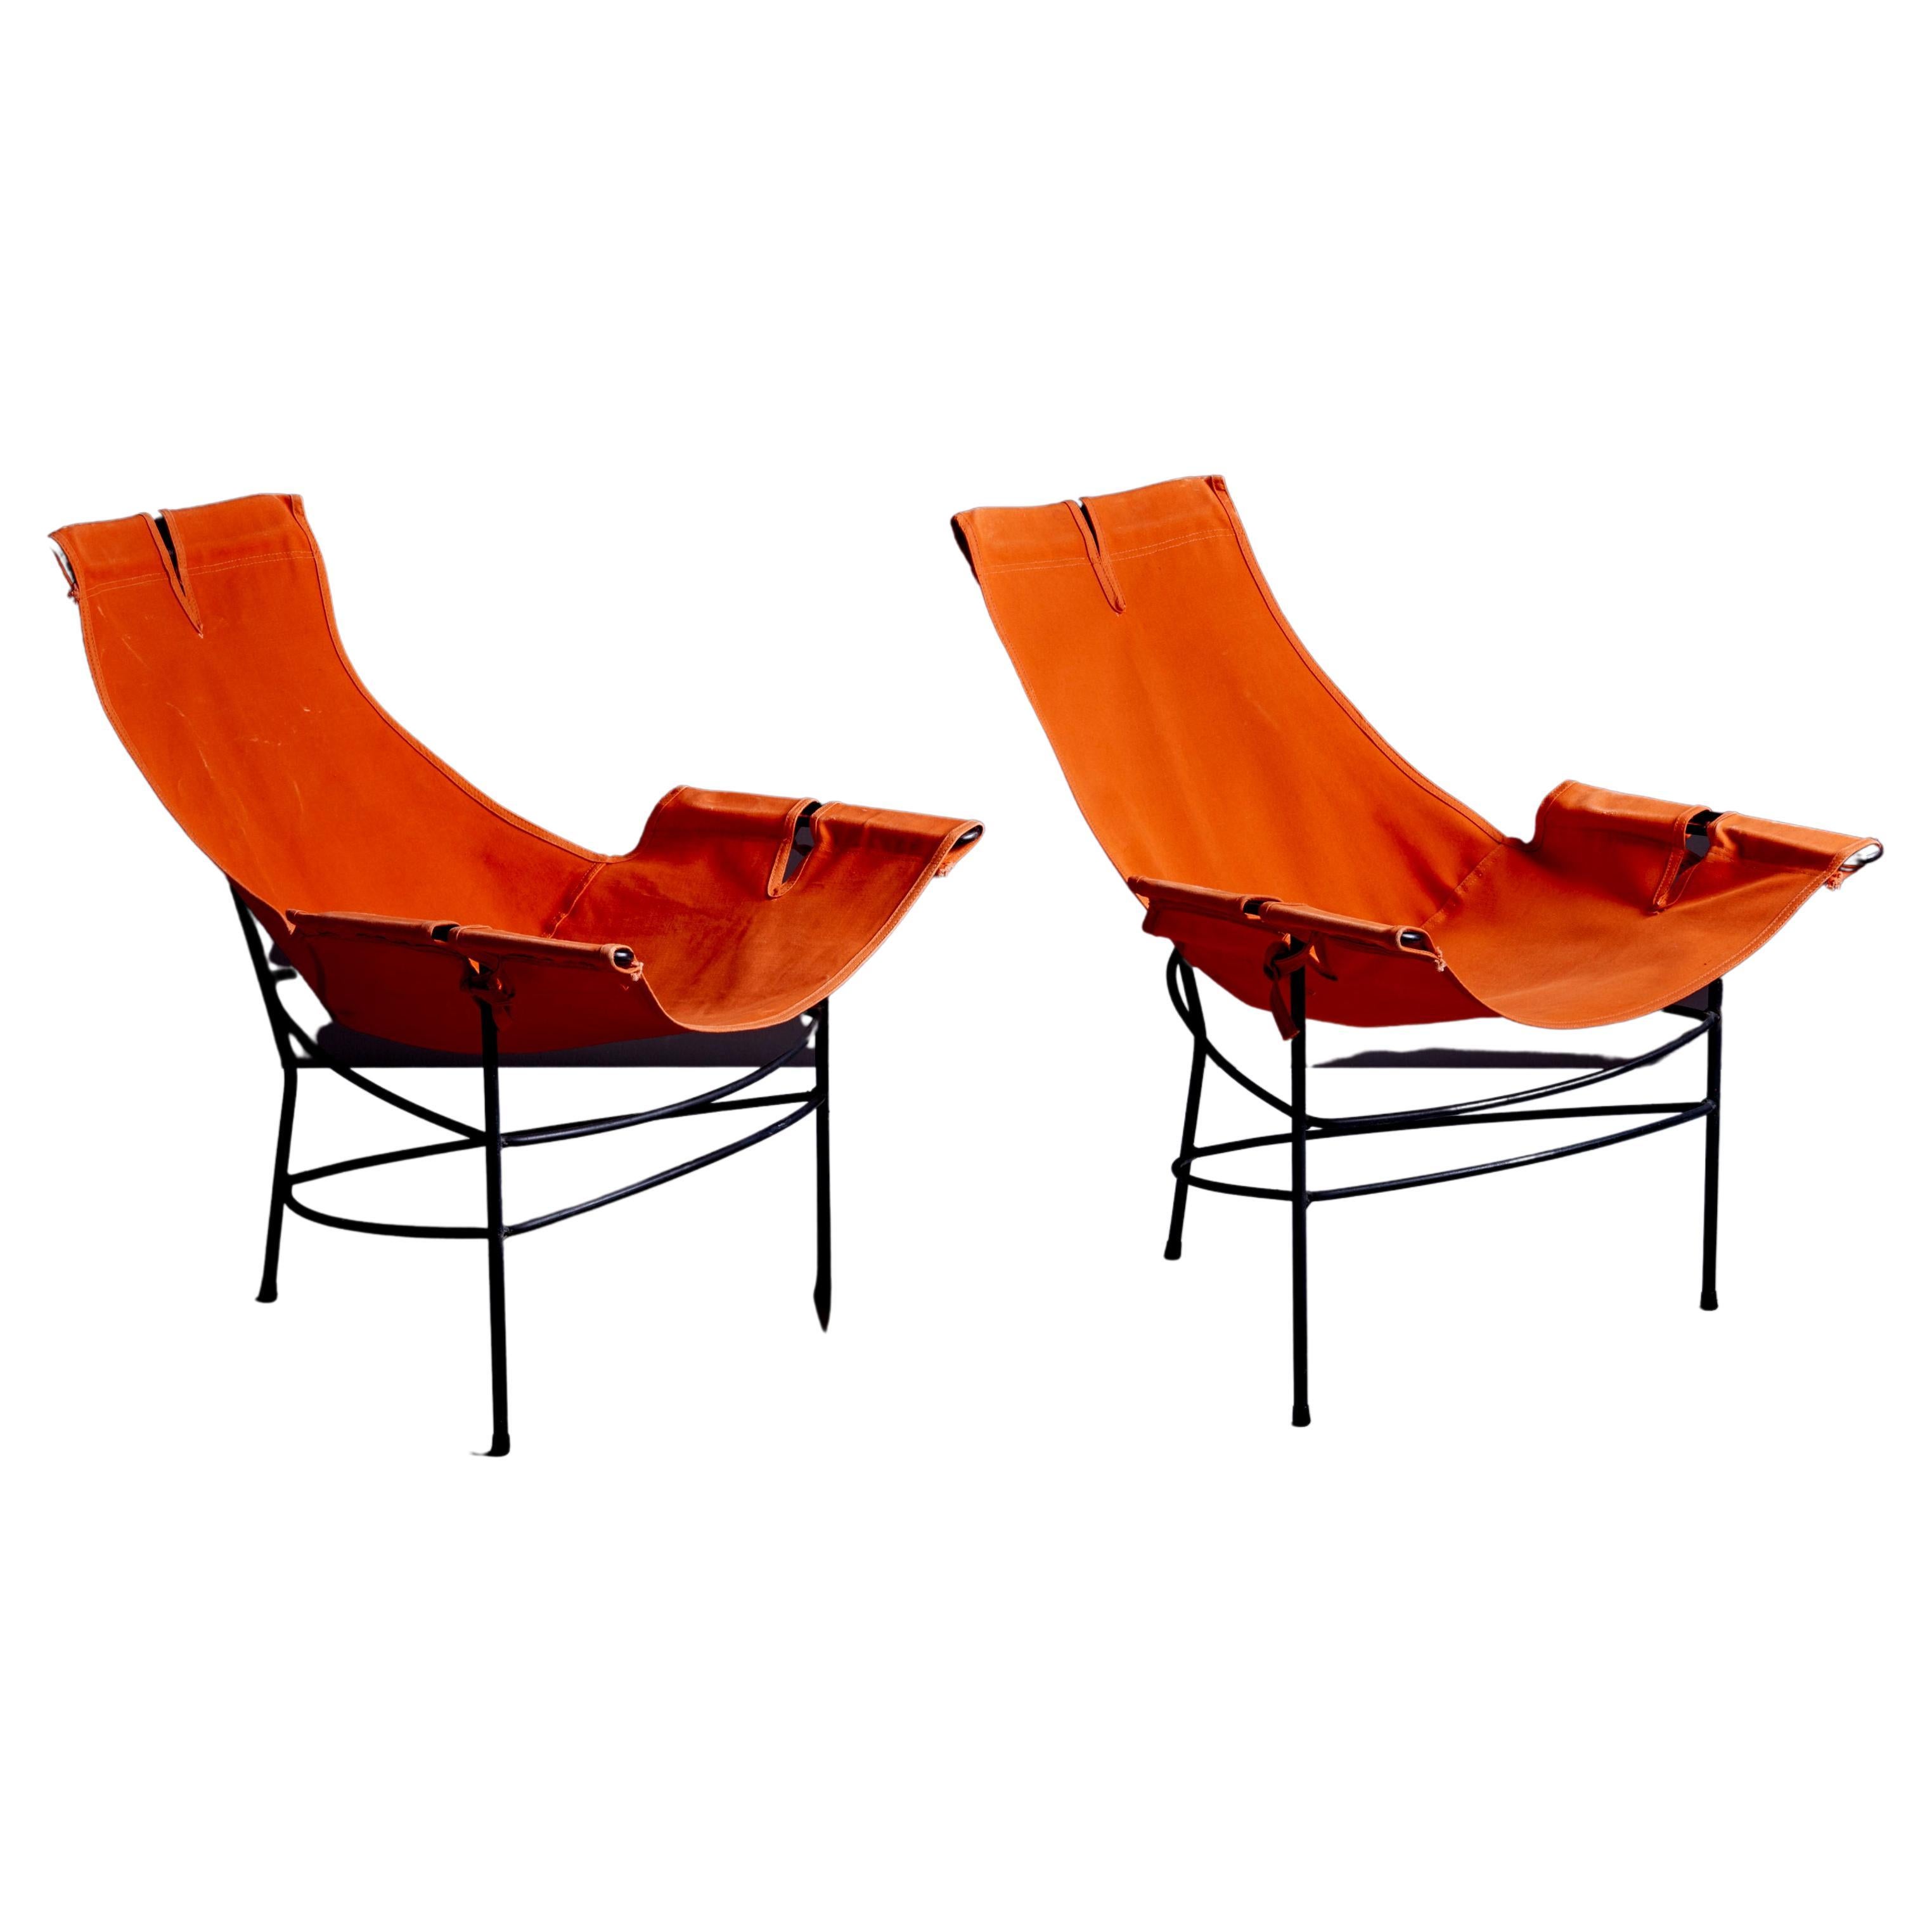 Pair of 2 Lounge Chairs by Jerry Johnson in Orange Canvas, USA, 1950s For Sale